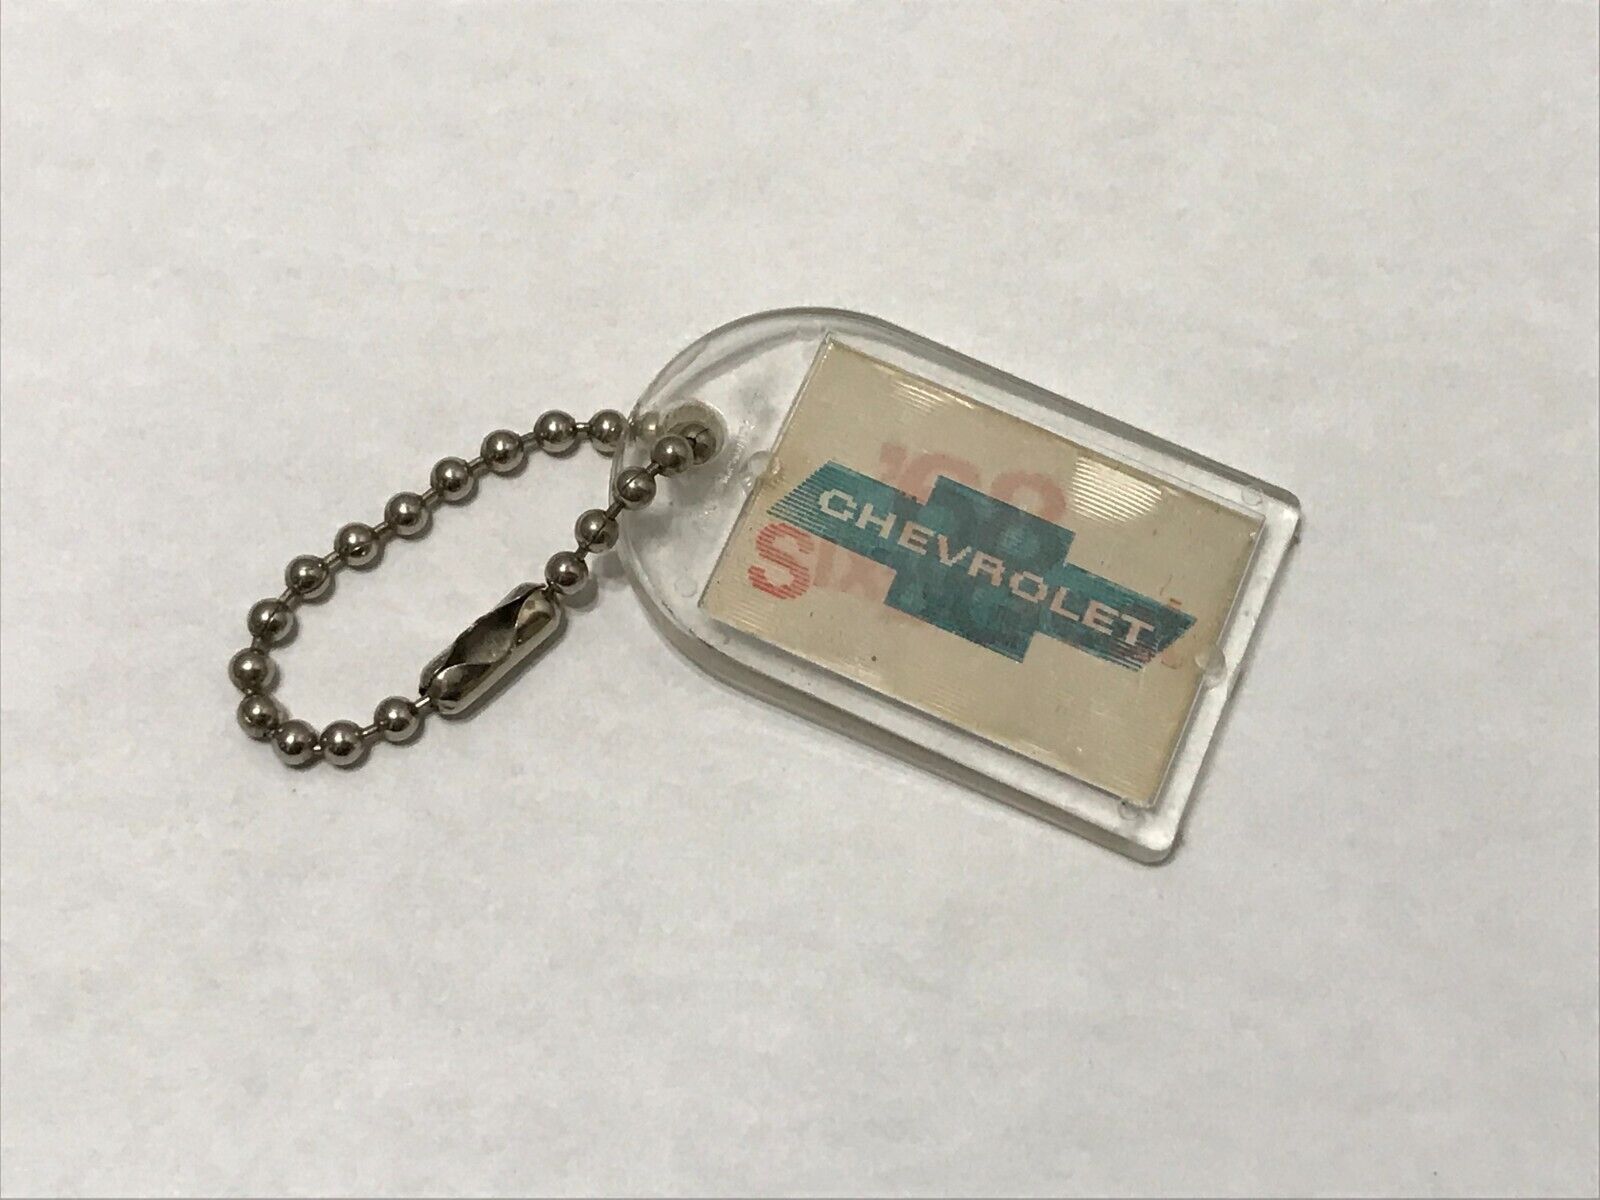 Vintage 1968 Chevrolet - \'68 Sixty Great - Lenticular Promotional Keychain